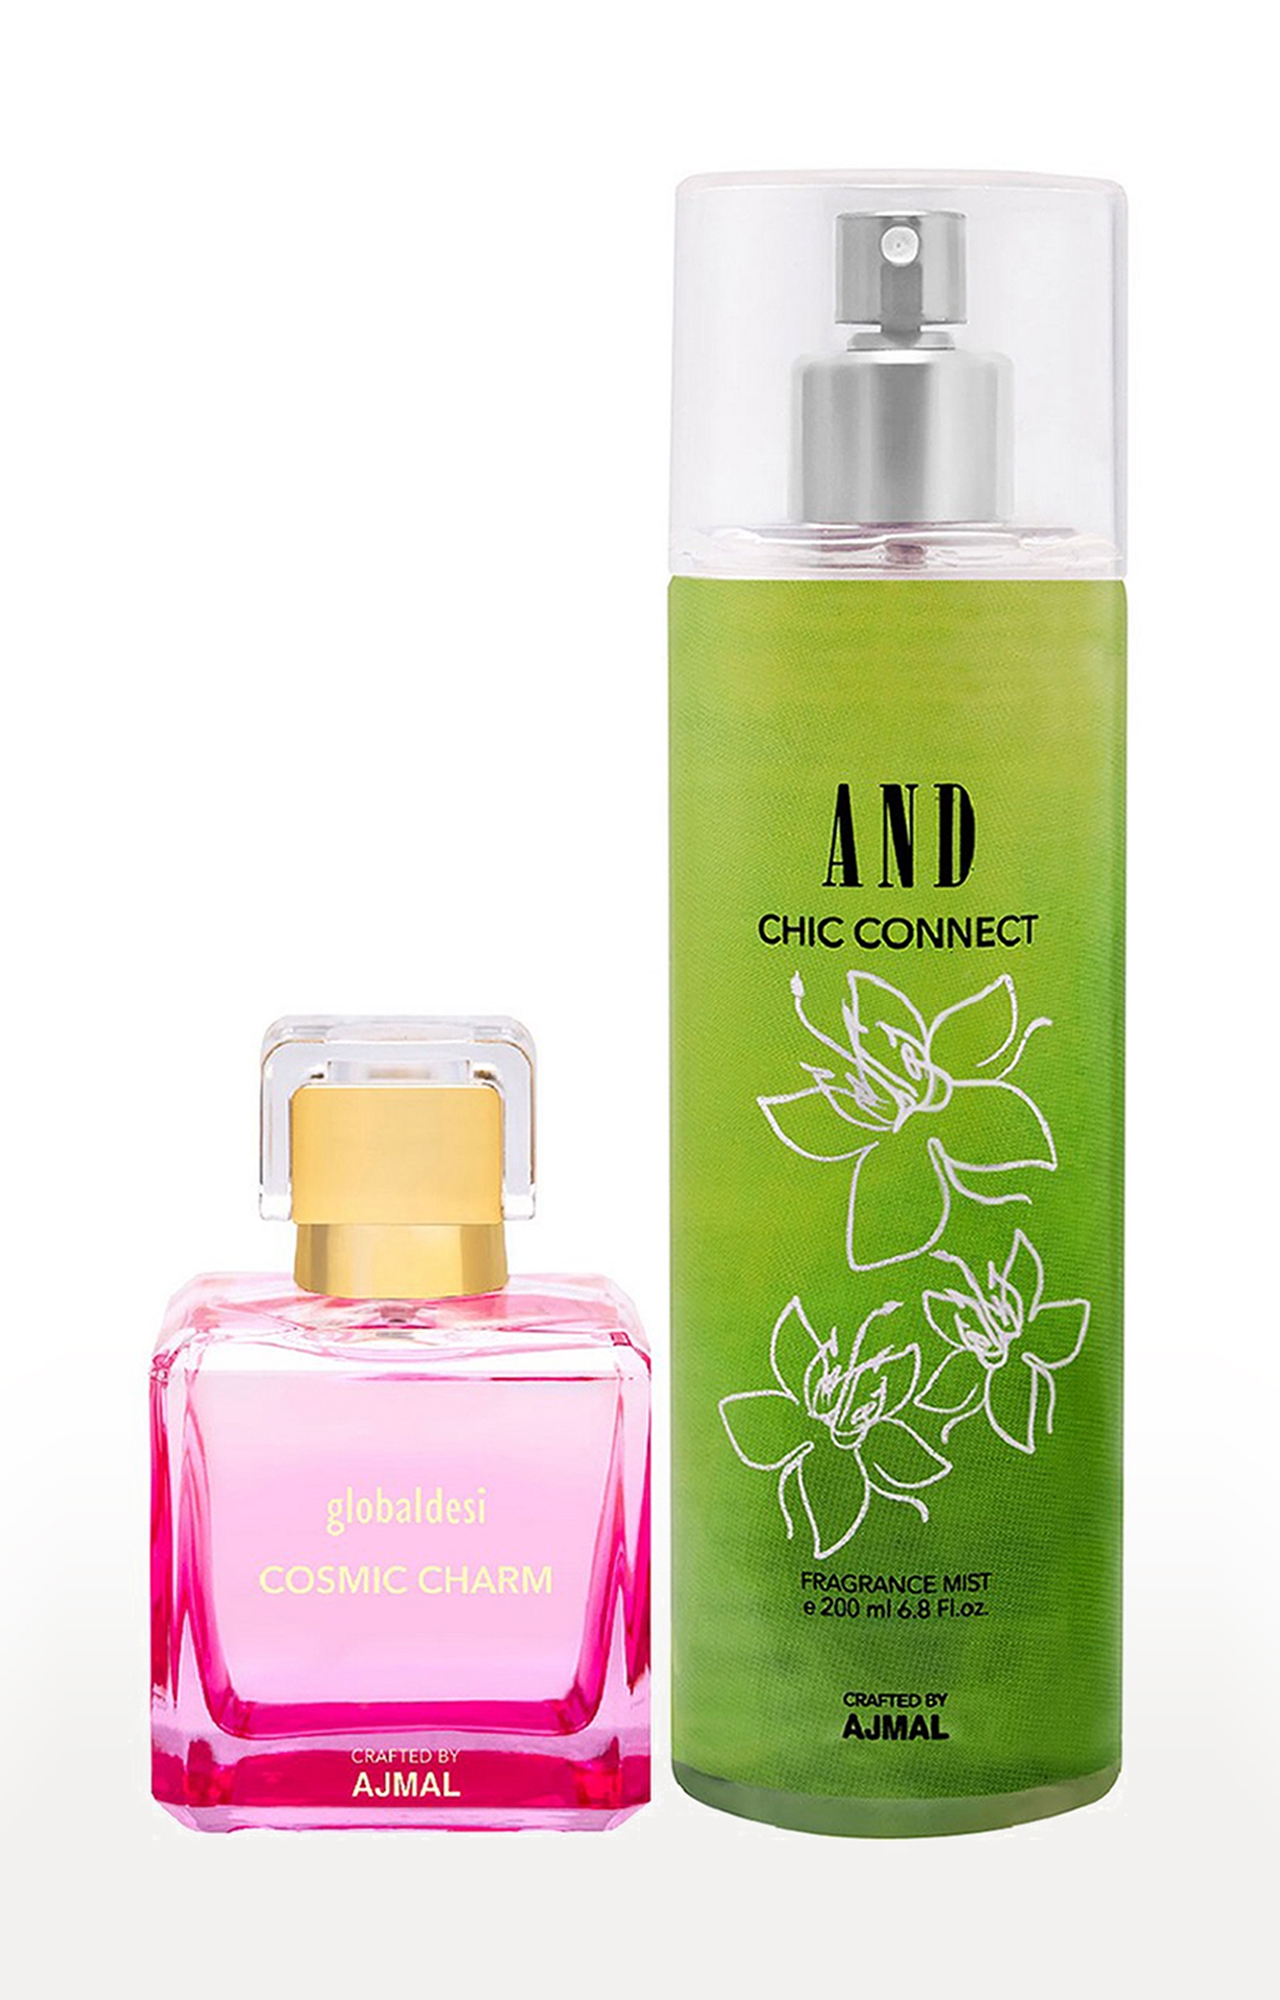 AND Crafted By Ajmal | Global Desi Cosmic Charm EDP 50ML & AND Chi Connect Body Mist 200ML  0